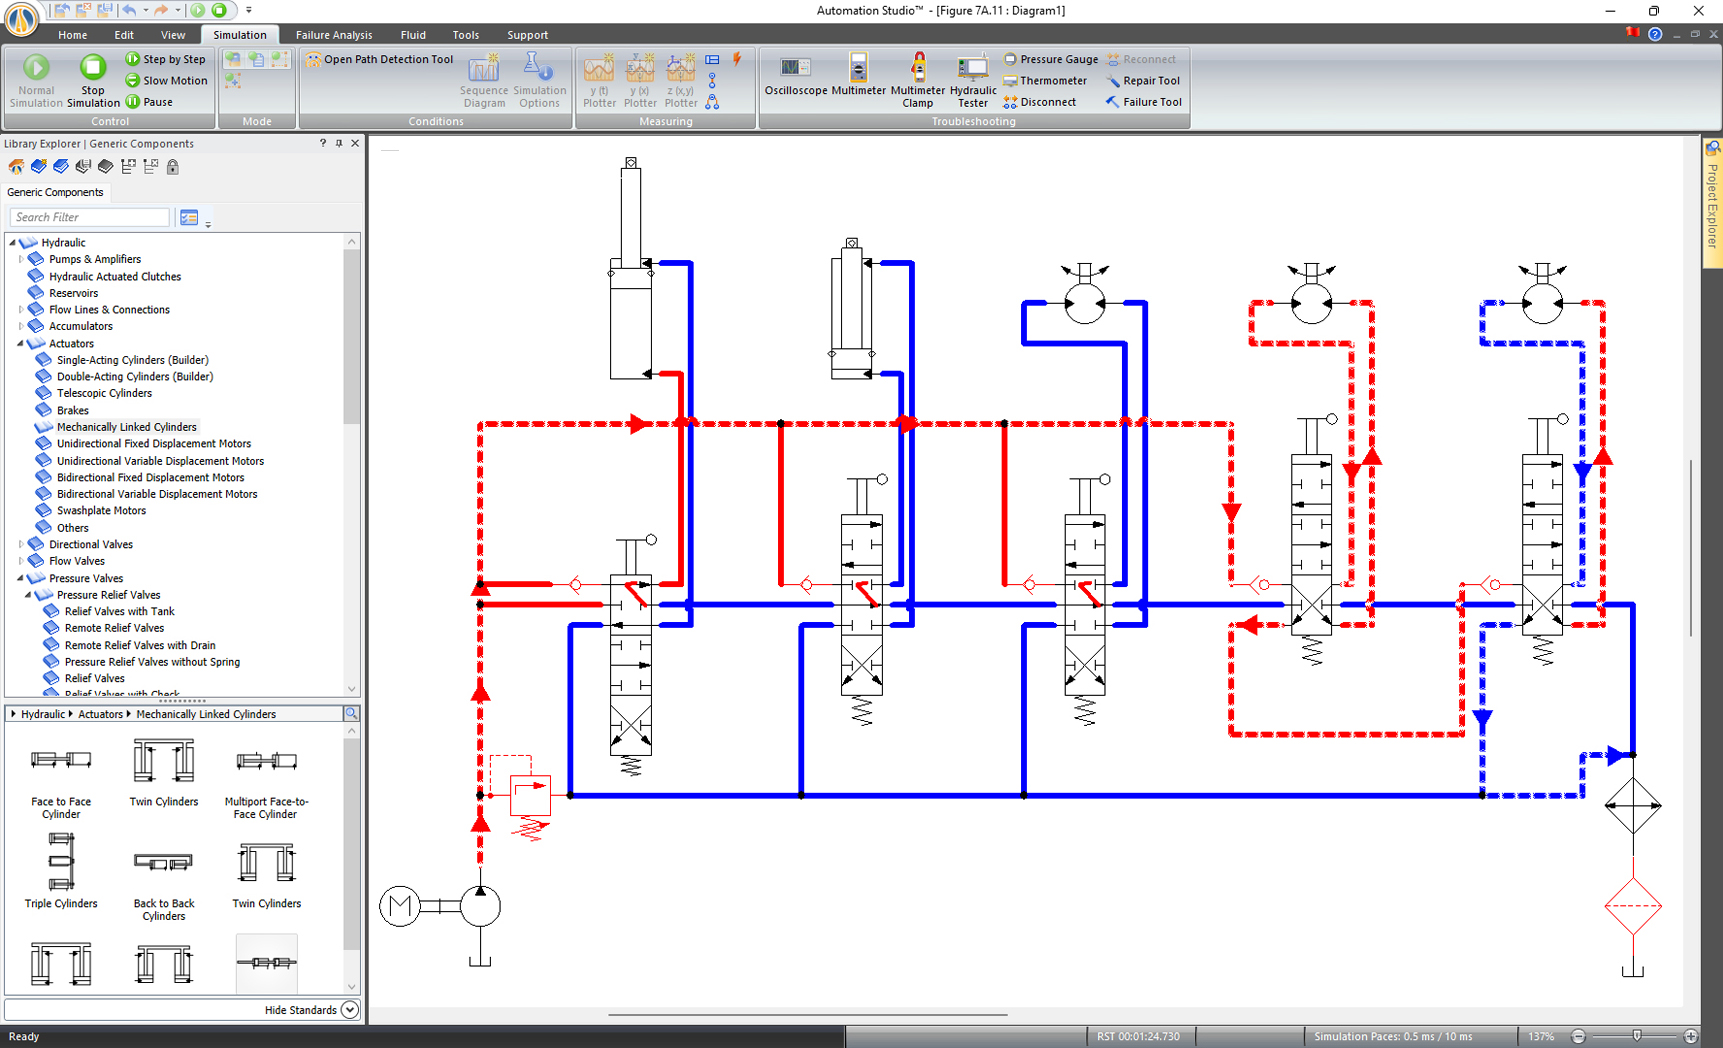 Electrical circuit simulated with Automation Studio Professional Edition software